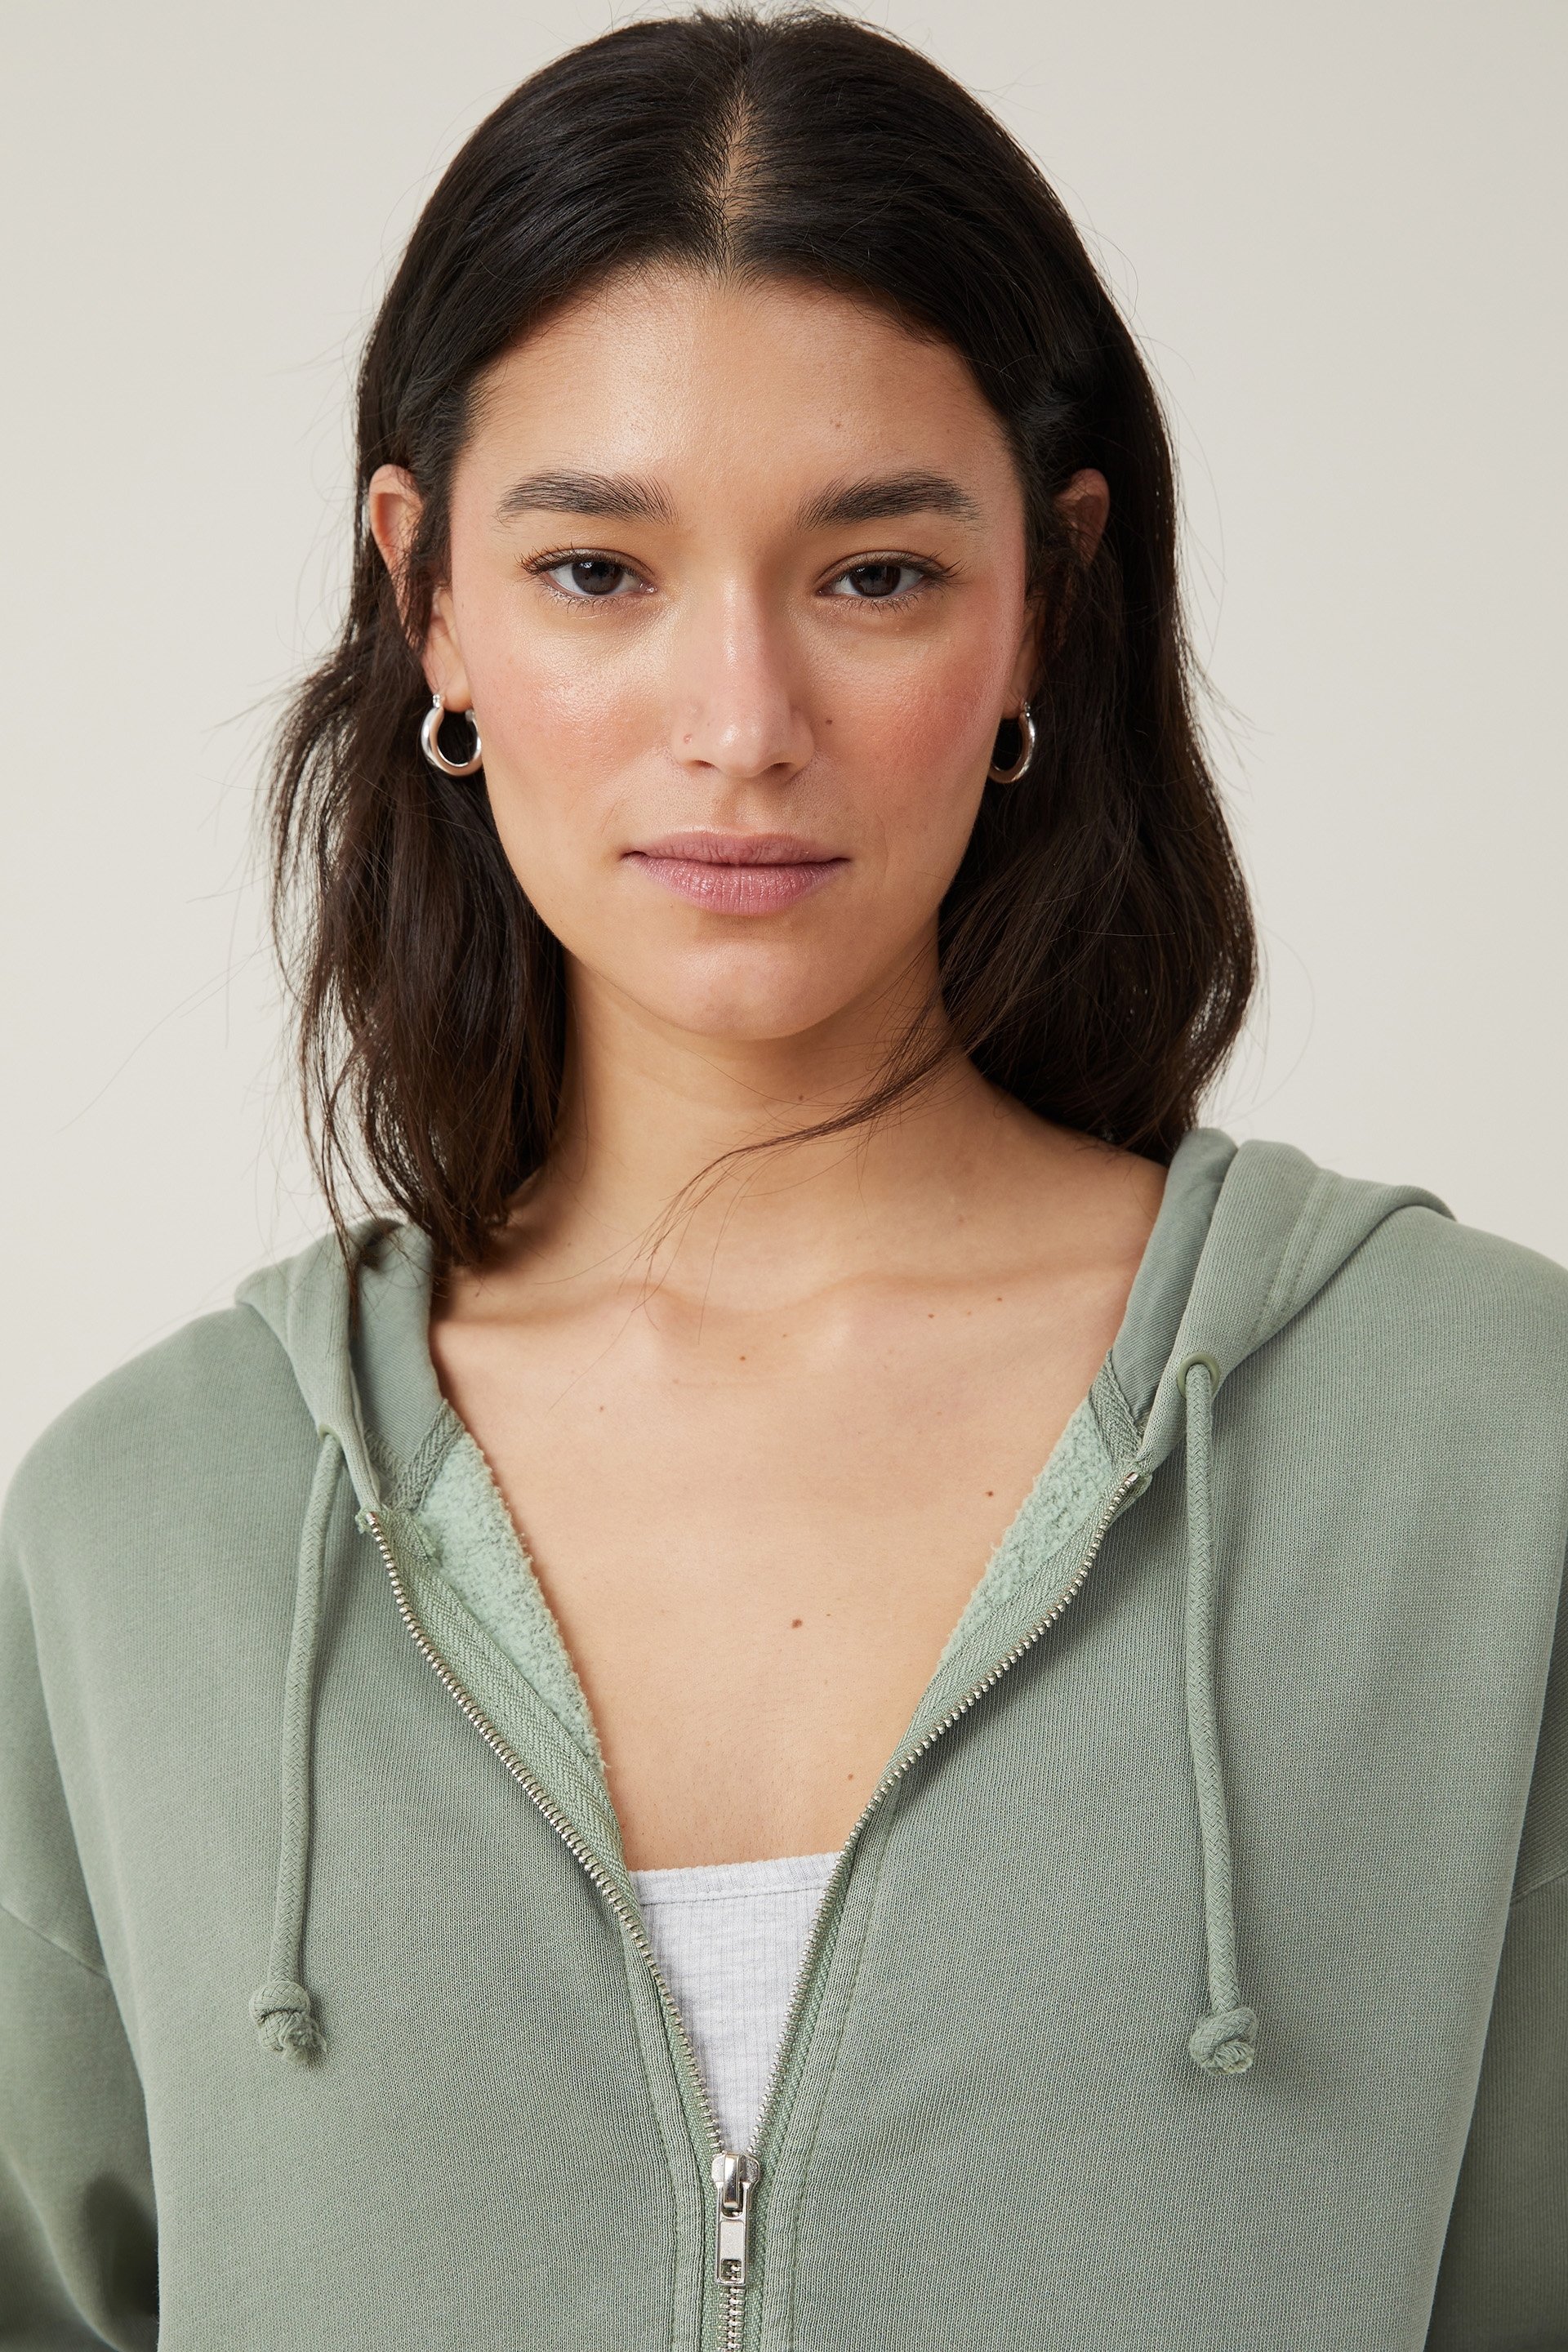 Cotton on Women - Classic Washed Zip-Through Hoodie - Washed Sage